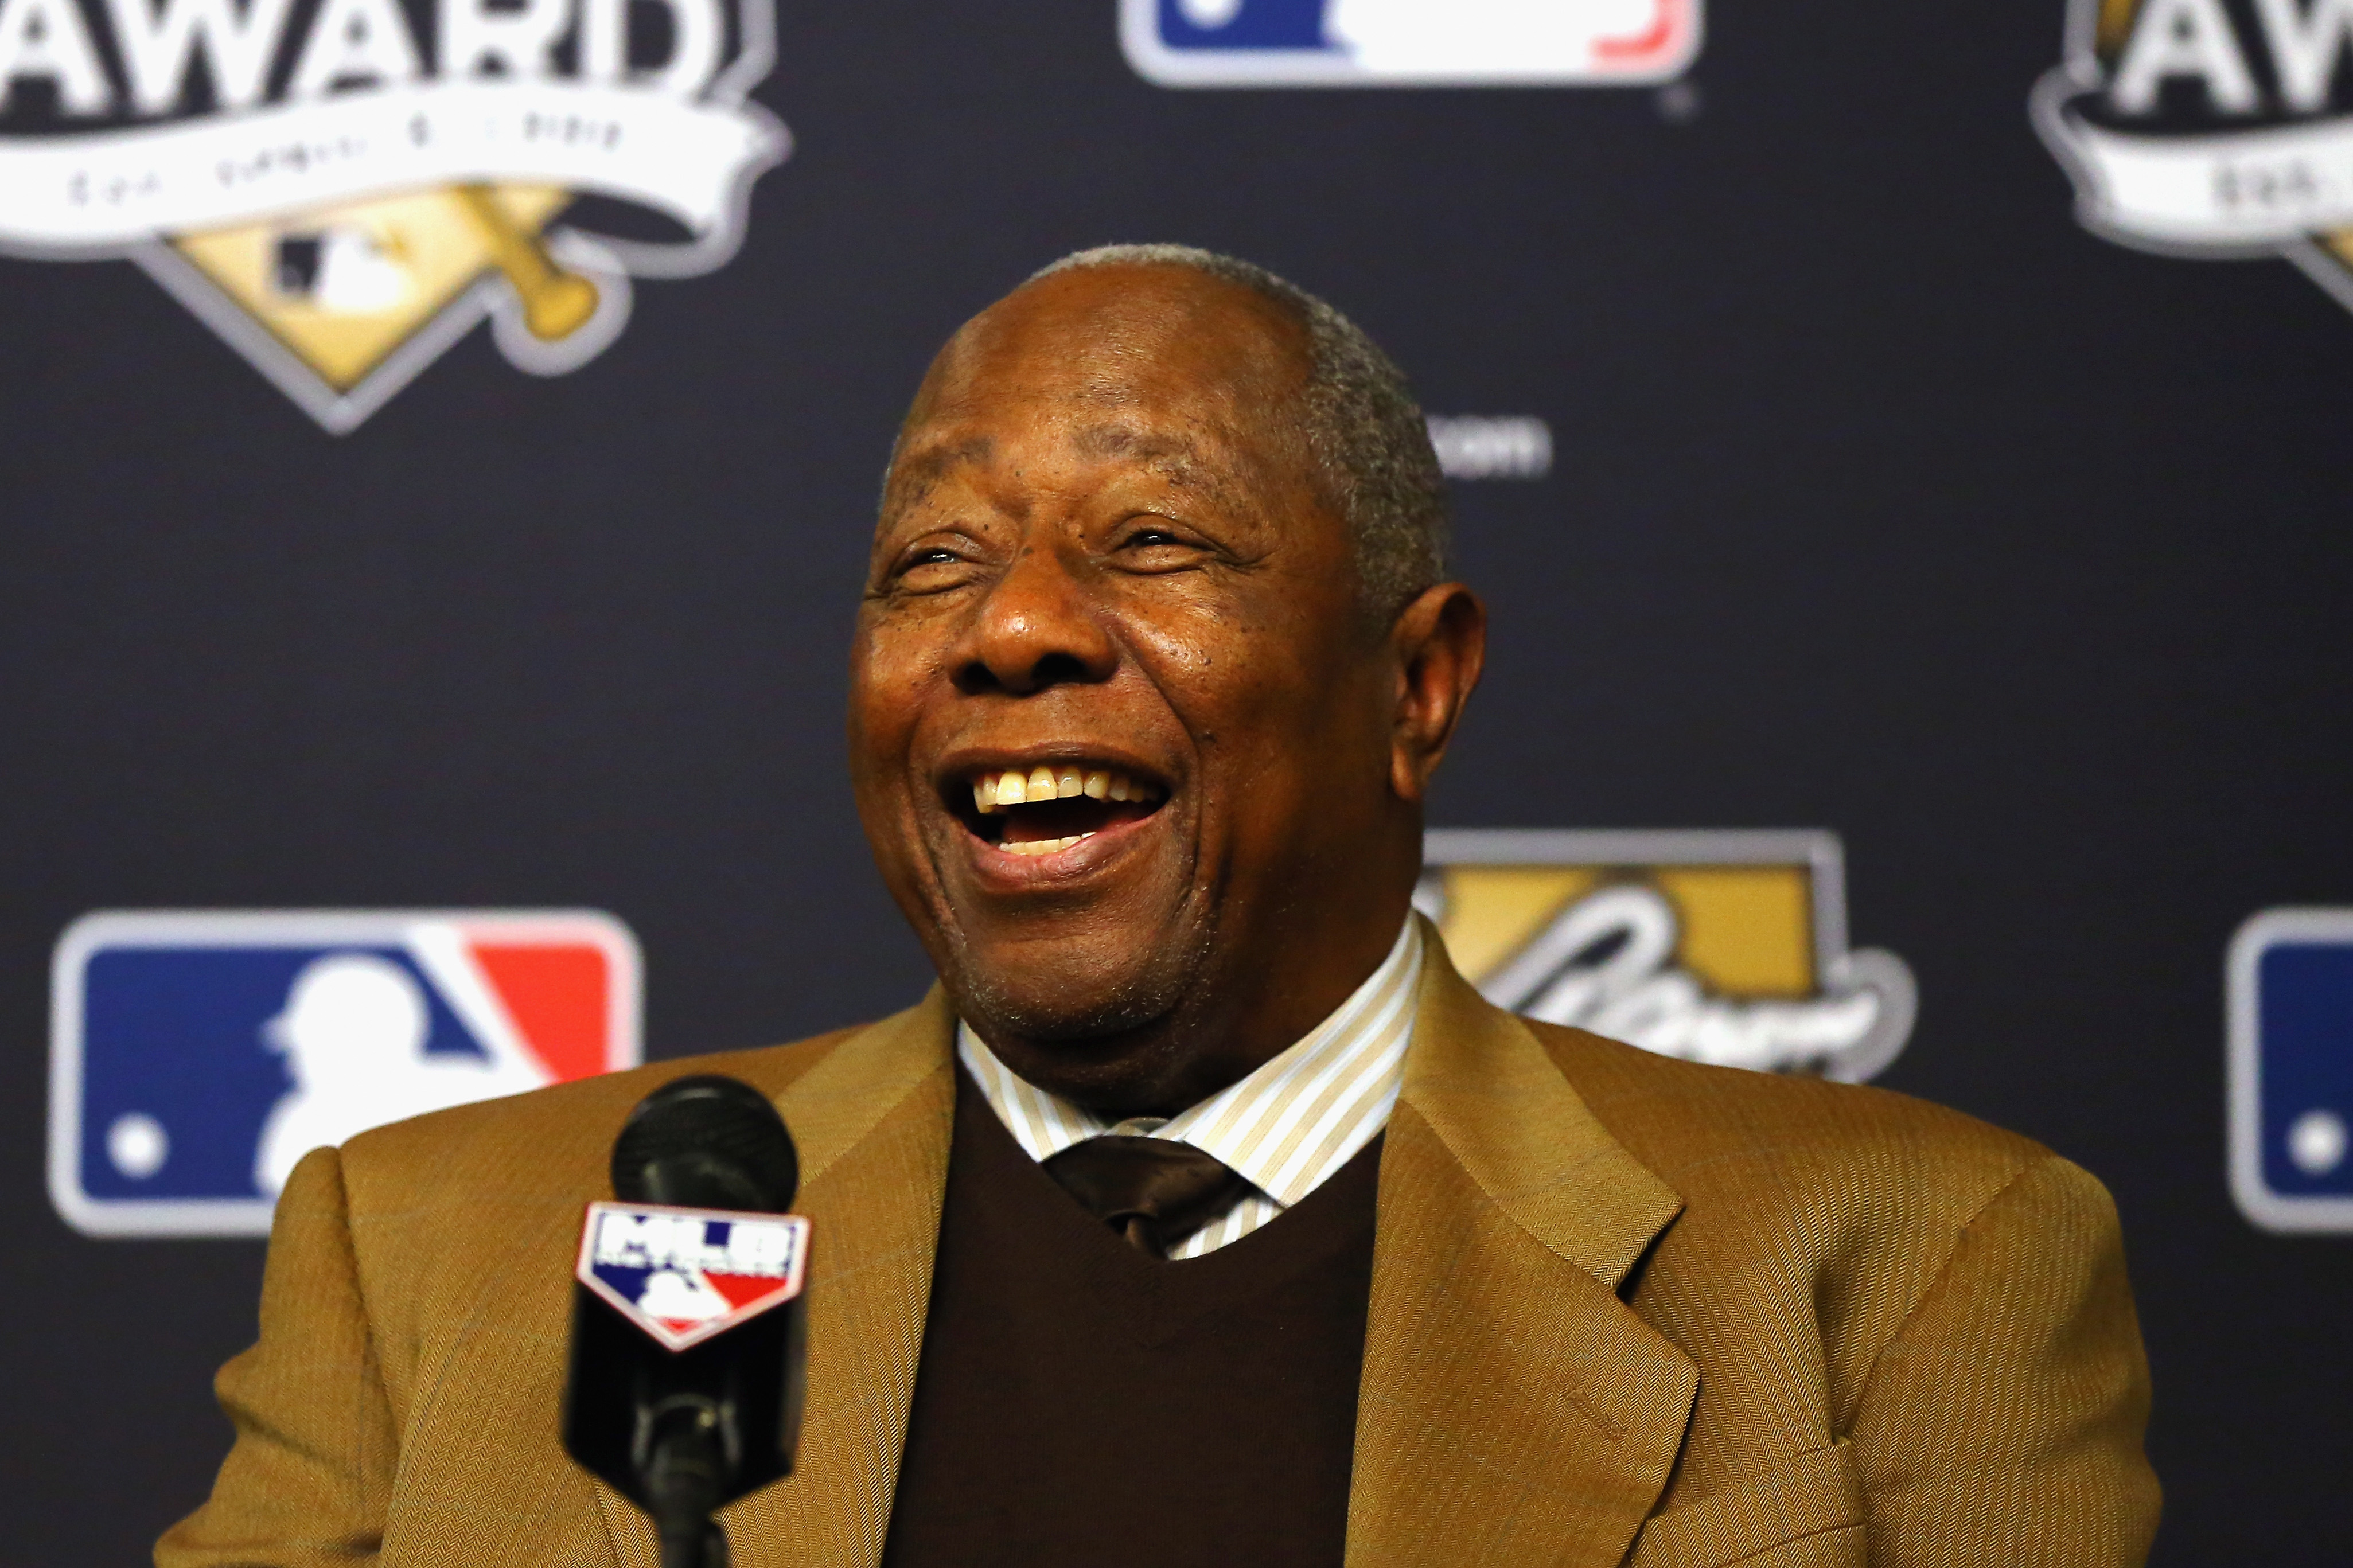 Hank Aaron at the 2015 Hank Aaron Award prior to Game Four of the 2015 World Series in Flushing, N.Y. on Oct. 31, 2015.